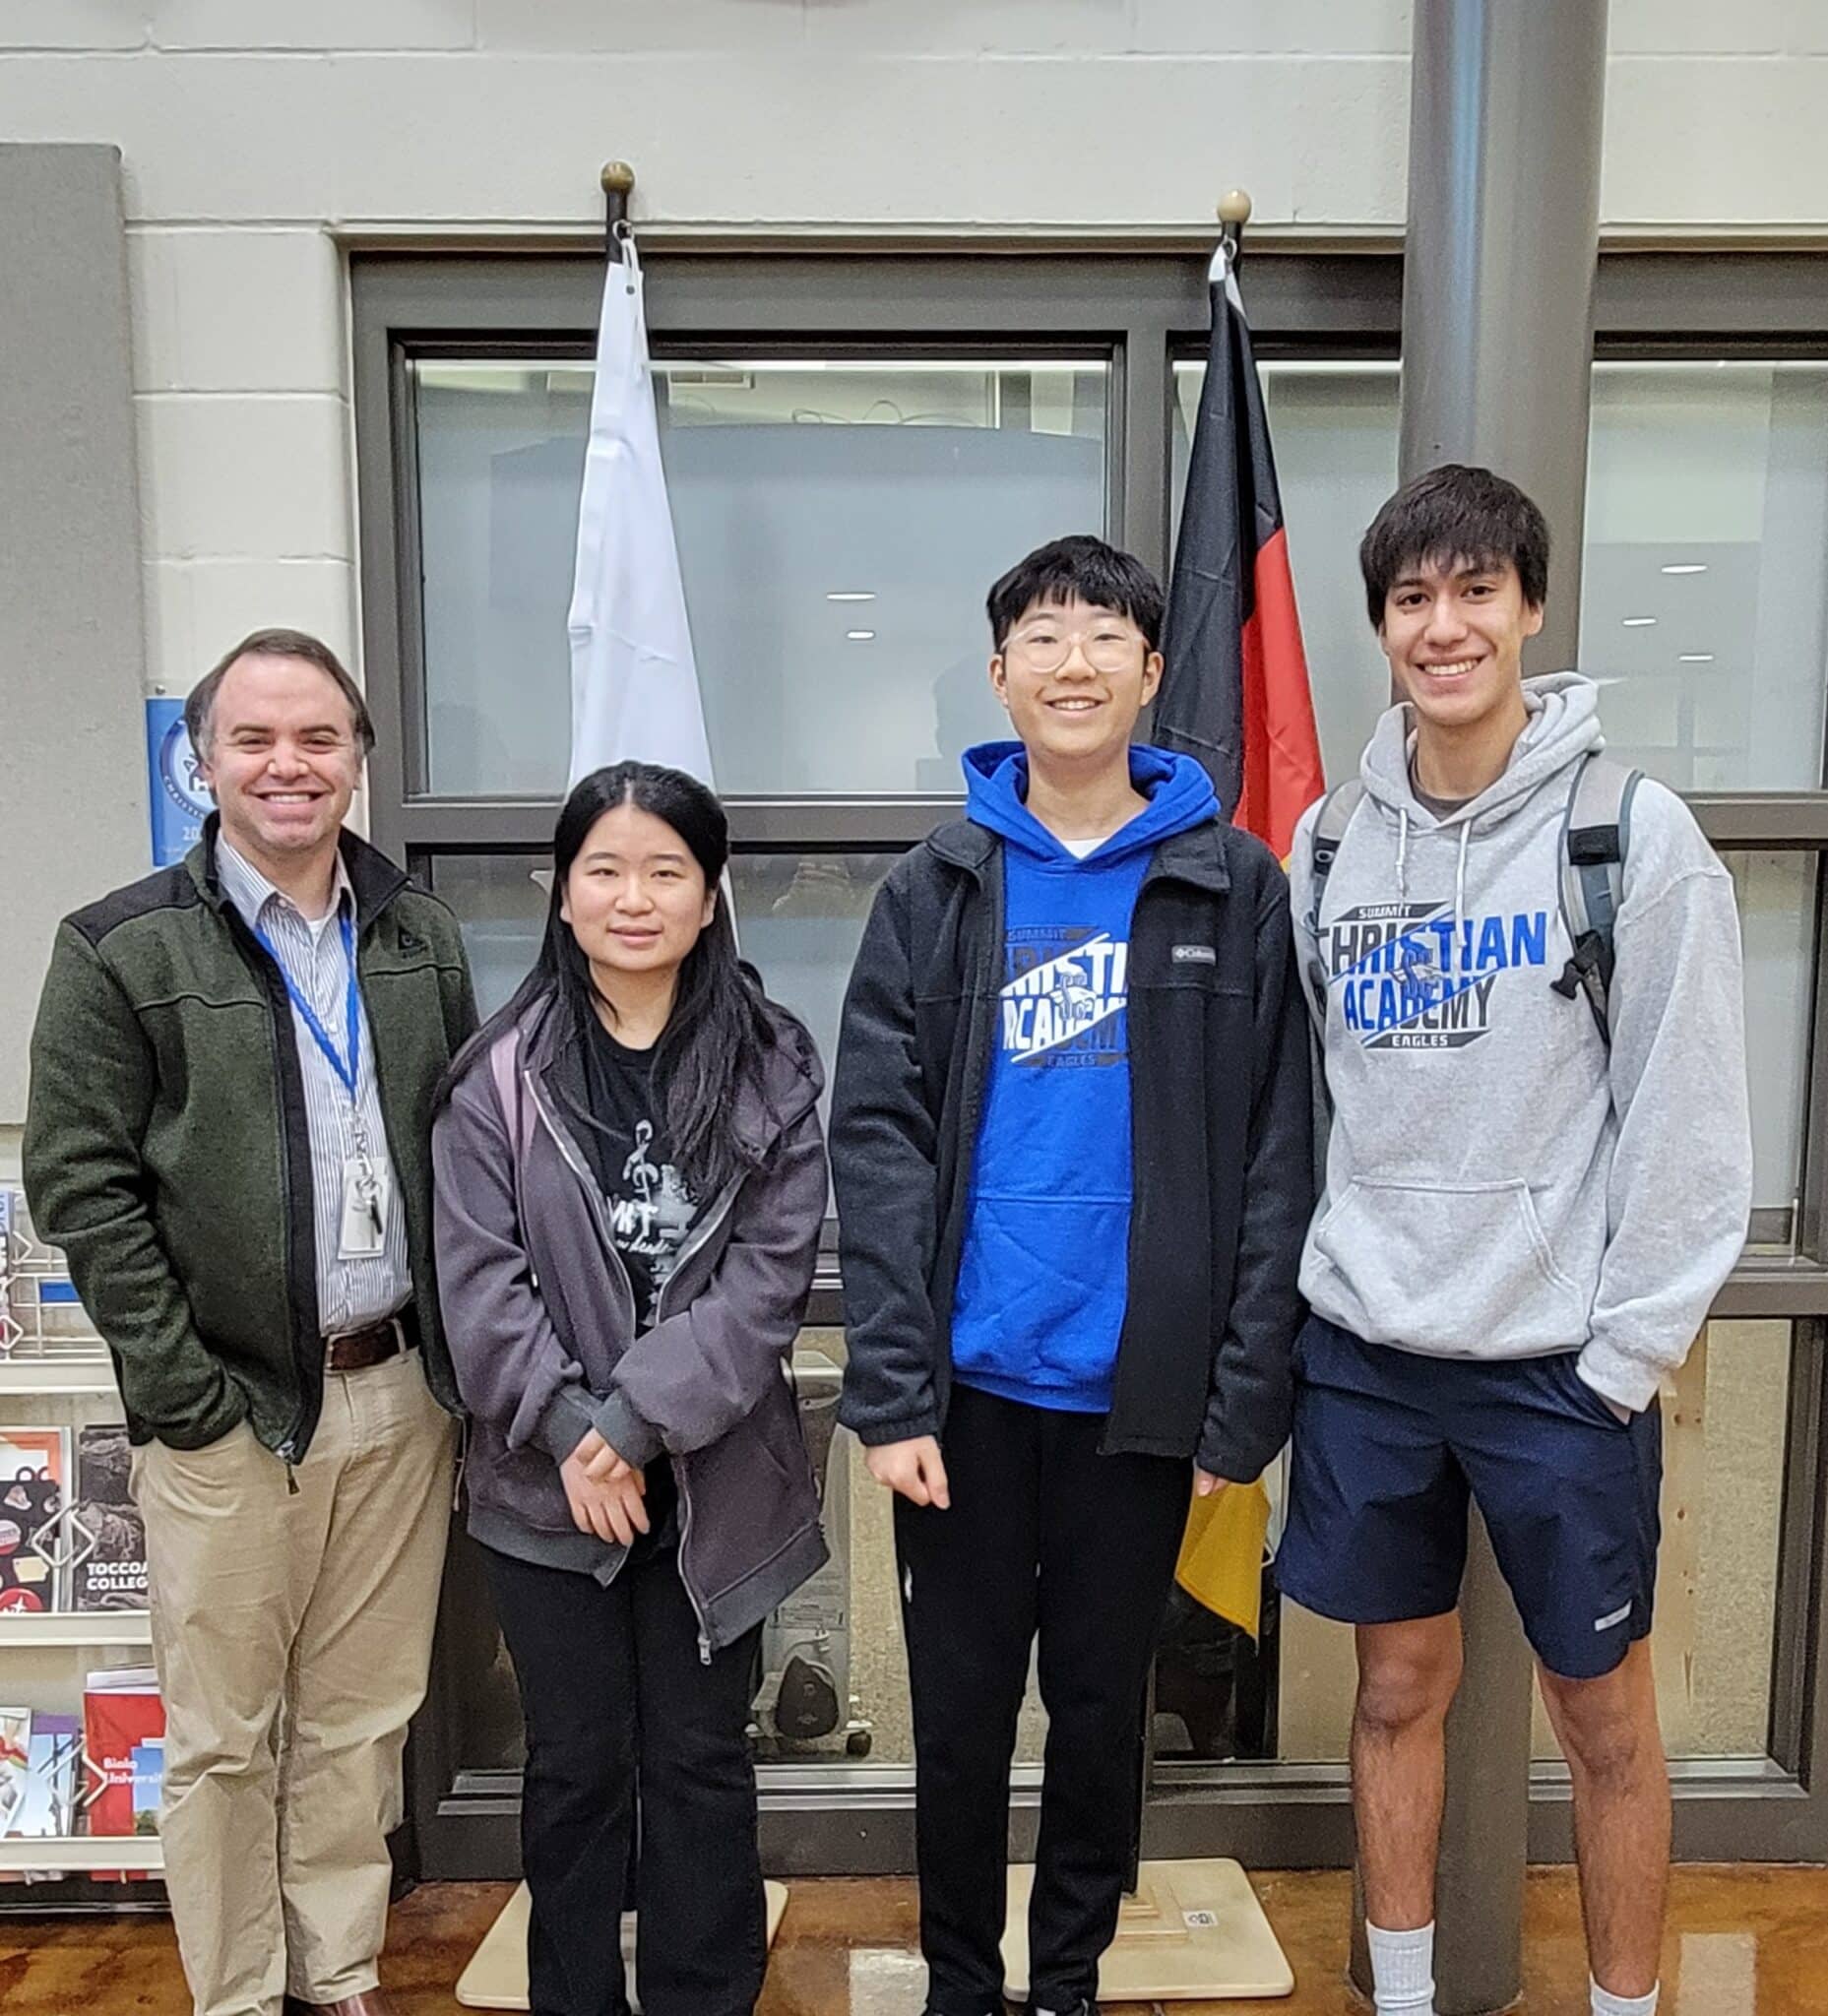 SCA International Education Week included a focus on prayer around the world! From left to right, SCA International Director Rocco DeFelice, Emma Bao (Chinese), John An (Korean), and David Beltran (Spanish) prayed for Secondary announcements each morning. Not pictured, Odeyla Kina (Arabic) and Carmen Mullis (Romanian) also led students in prayer.